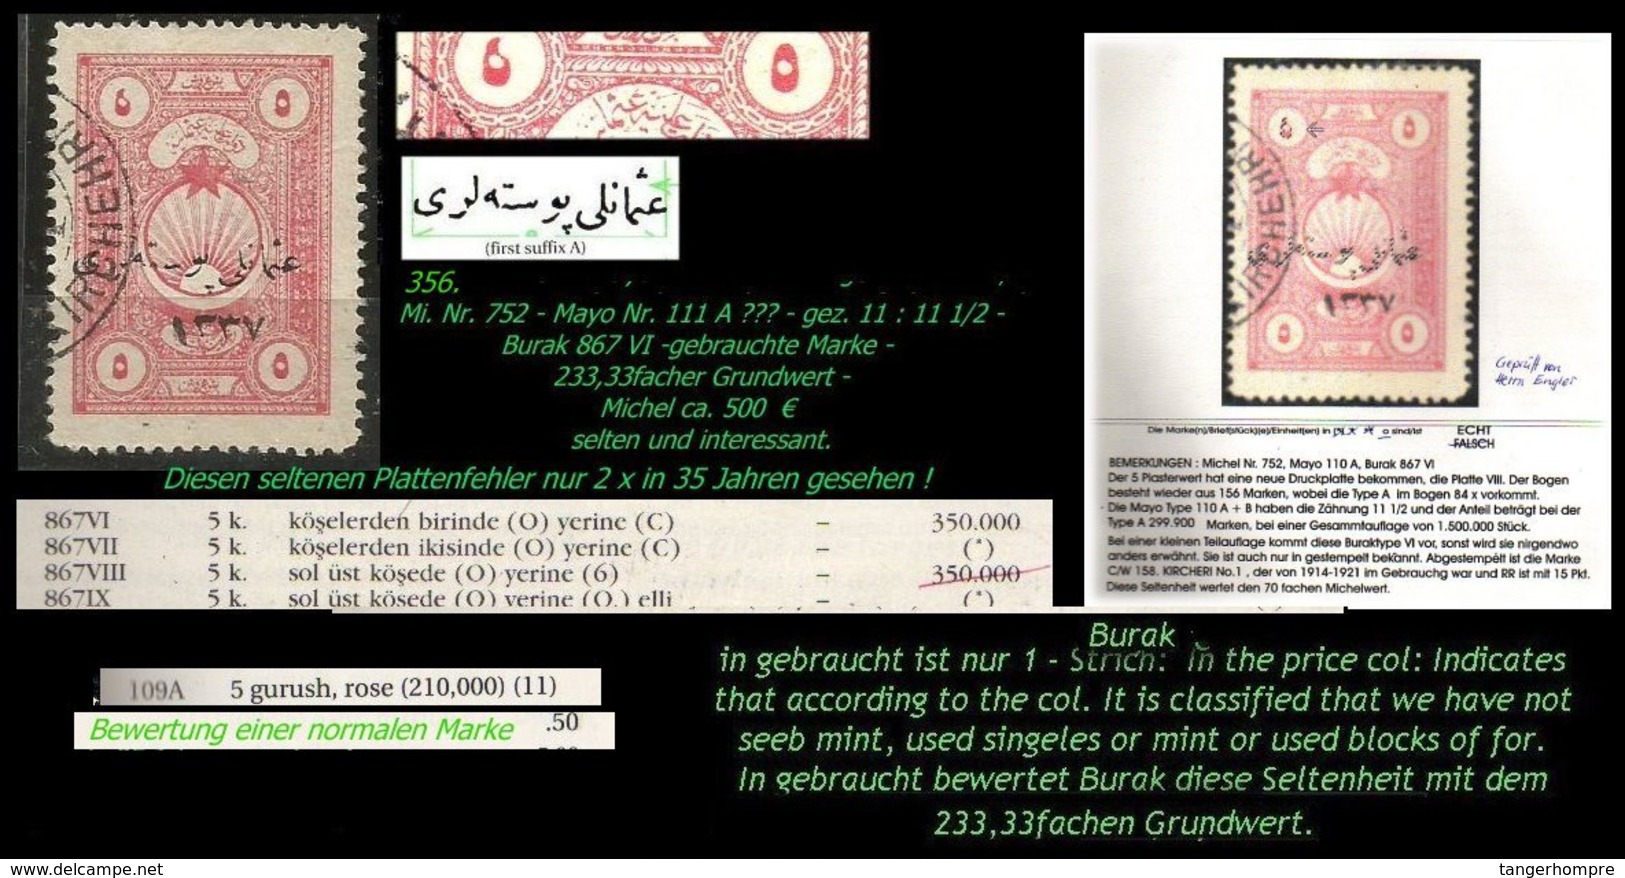 EARLY OTTOMAN SPECIALIZED FOR SPECIALIST, SEE...Mi. Nr. 752 - Mayo 111 A - Bitte Lesen ! -RRR- - 1920-21 Anatolie